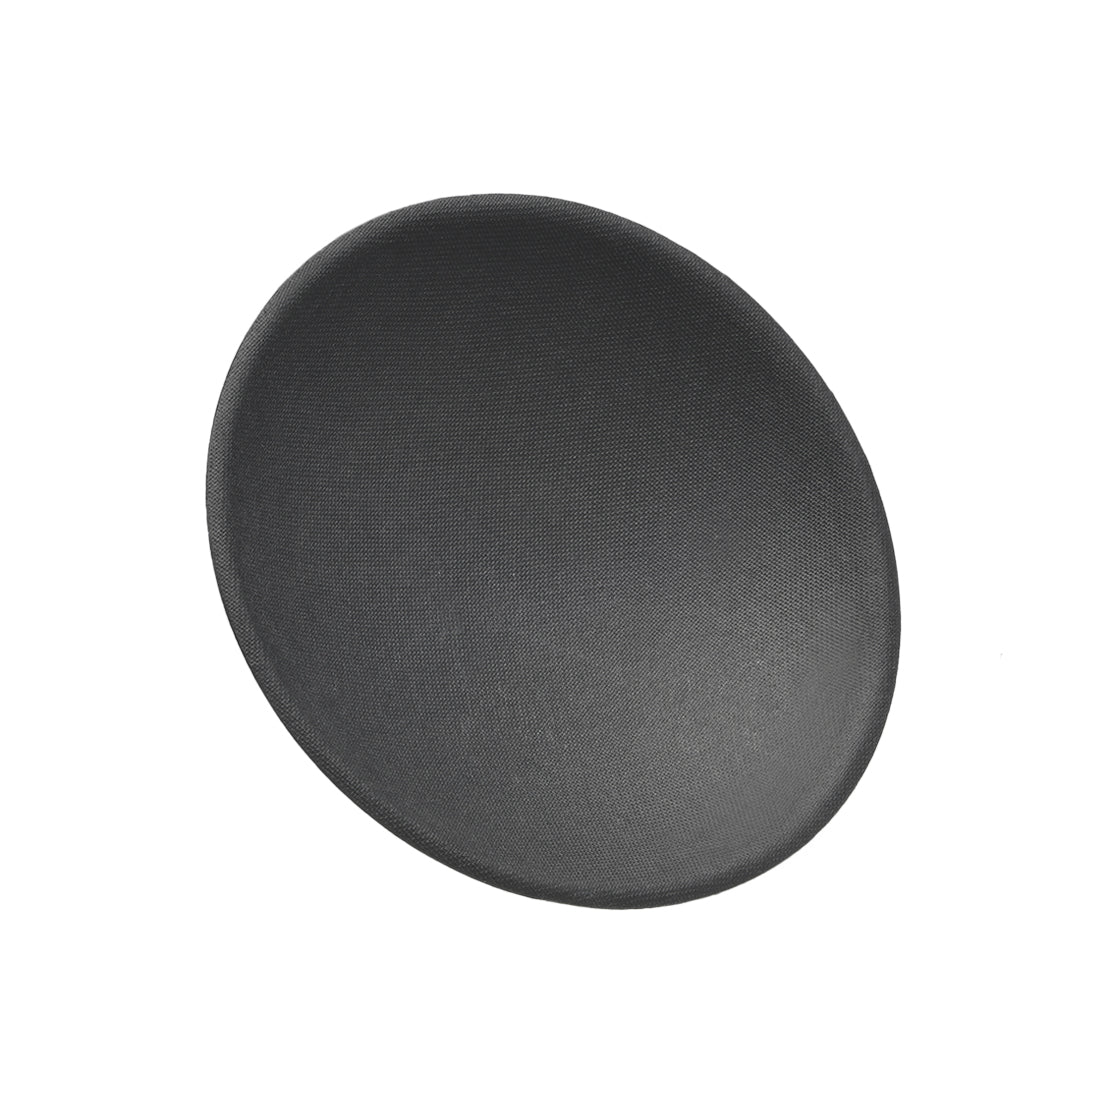 uxcell Uxcell Speaker Dust Cap 130mm/5" Diameter Subwoofer Paper Dome Coil Cover Caps